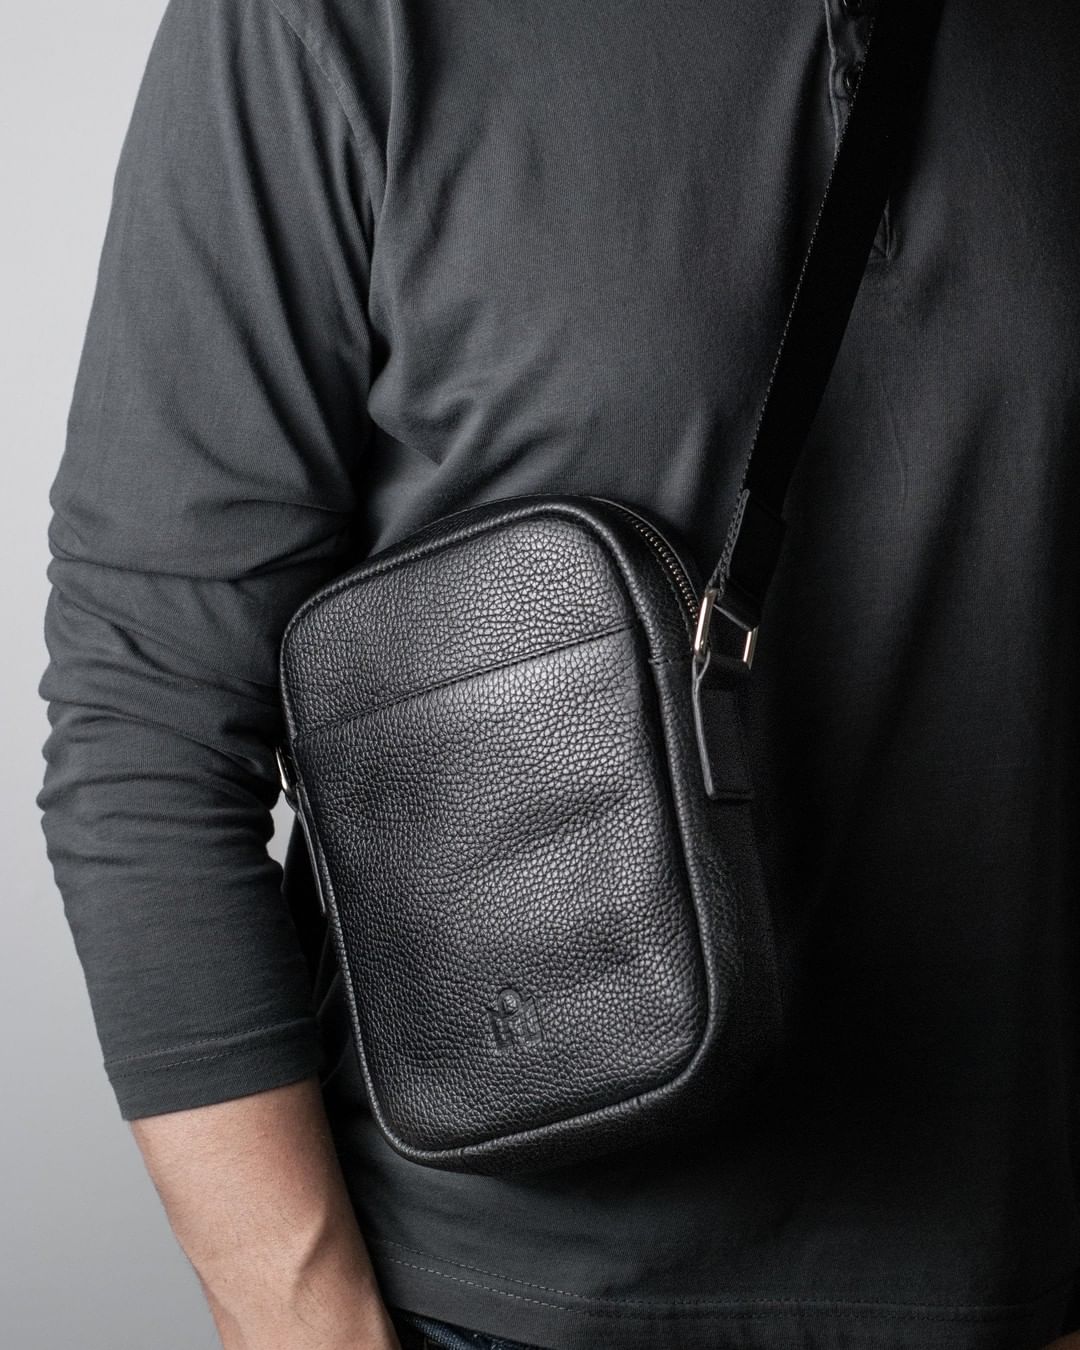 24 functional and stylish work bags for men | CNN Underscored